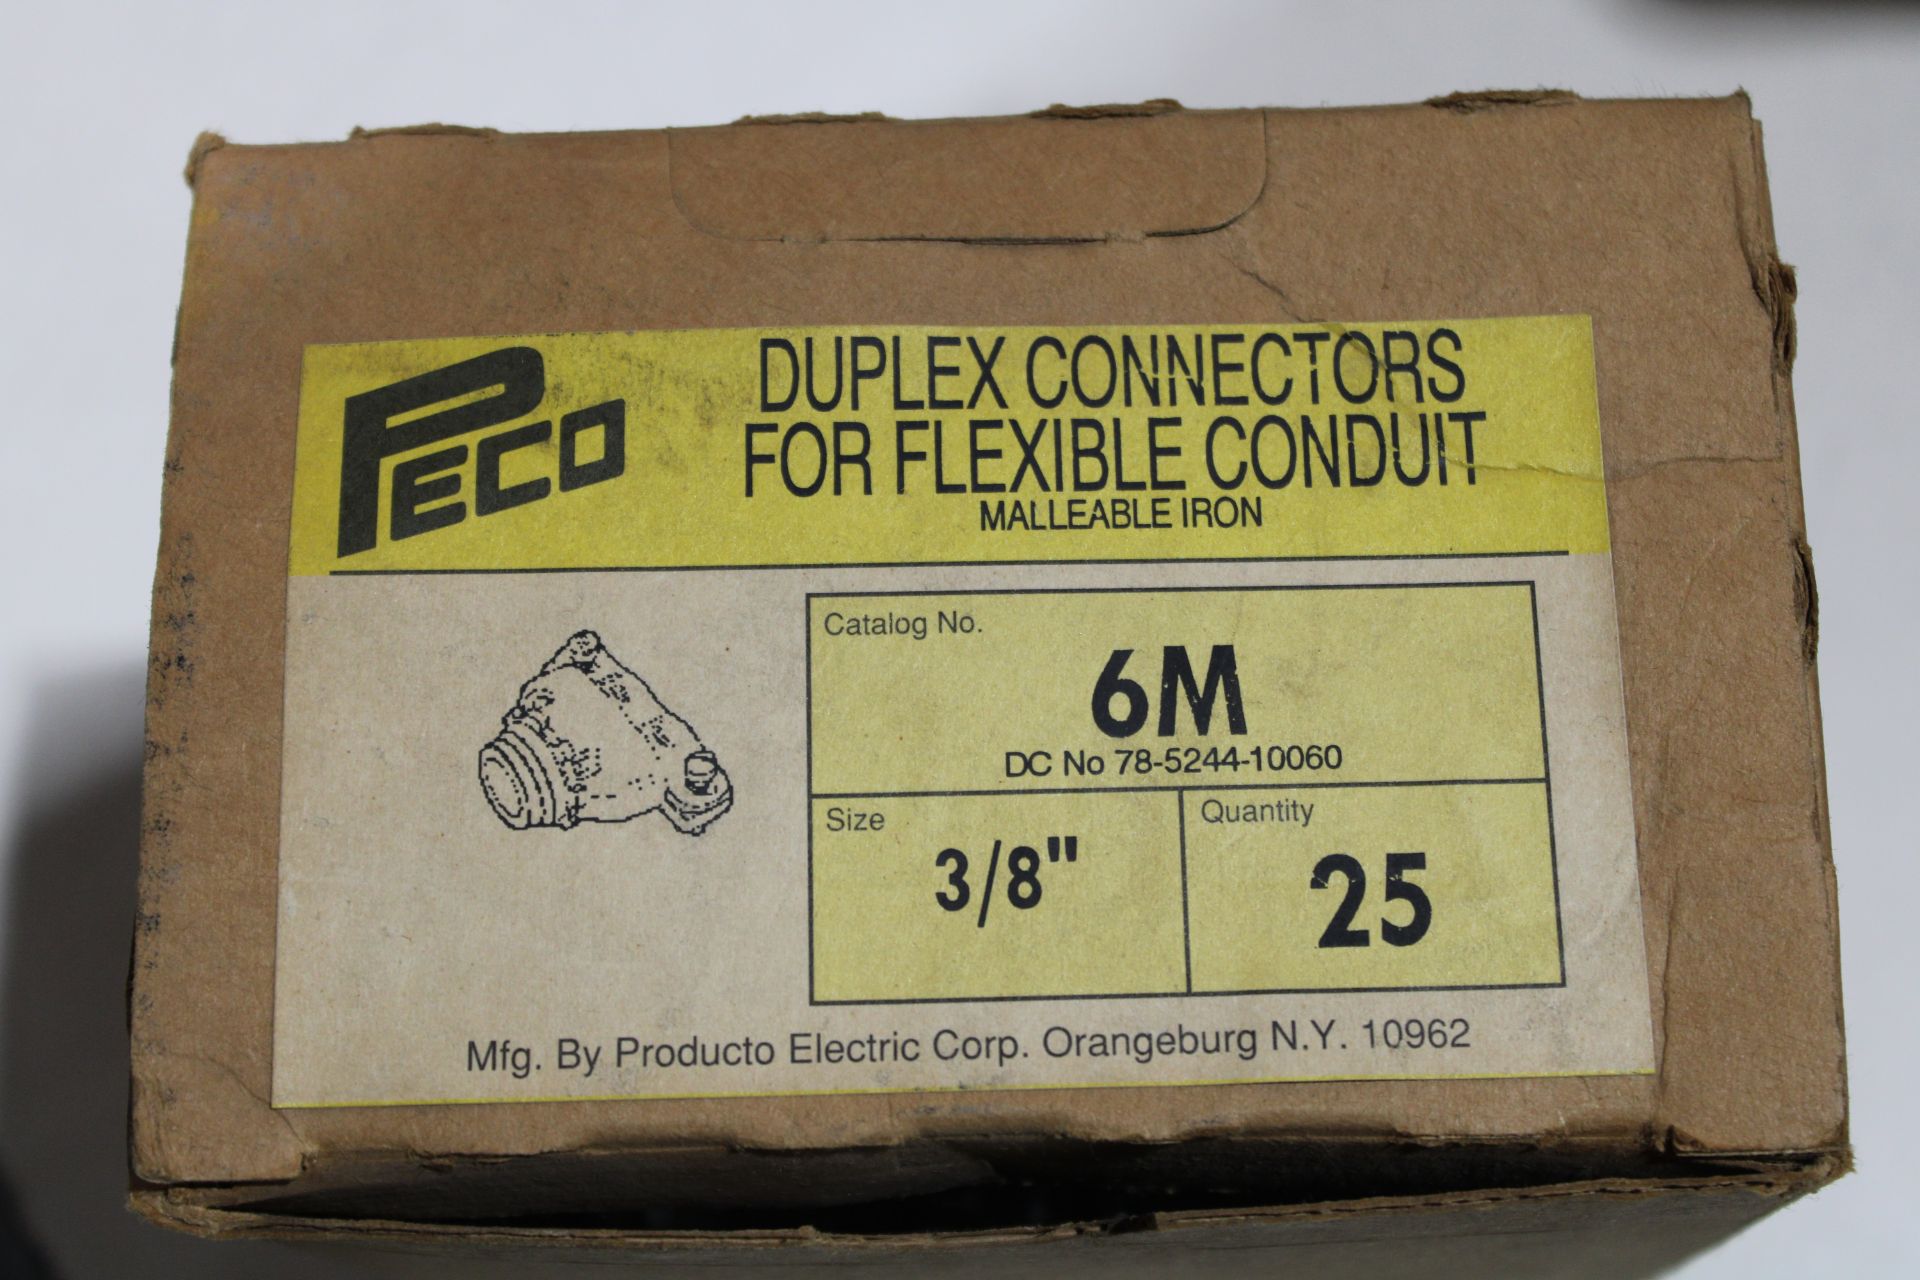 36x Peco 6M Cord and Cable Fittings 25BOX